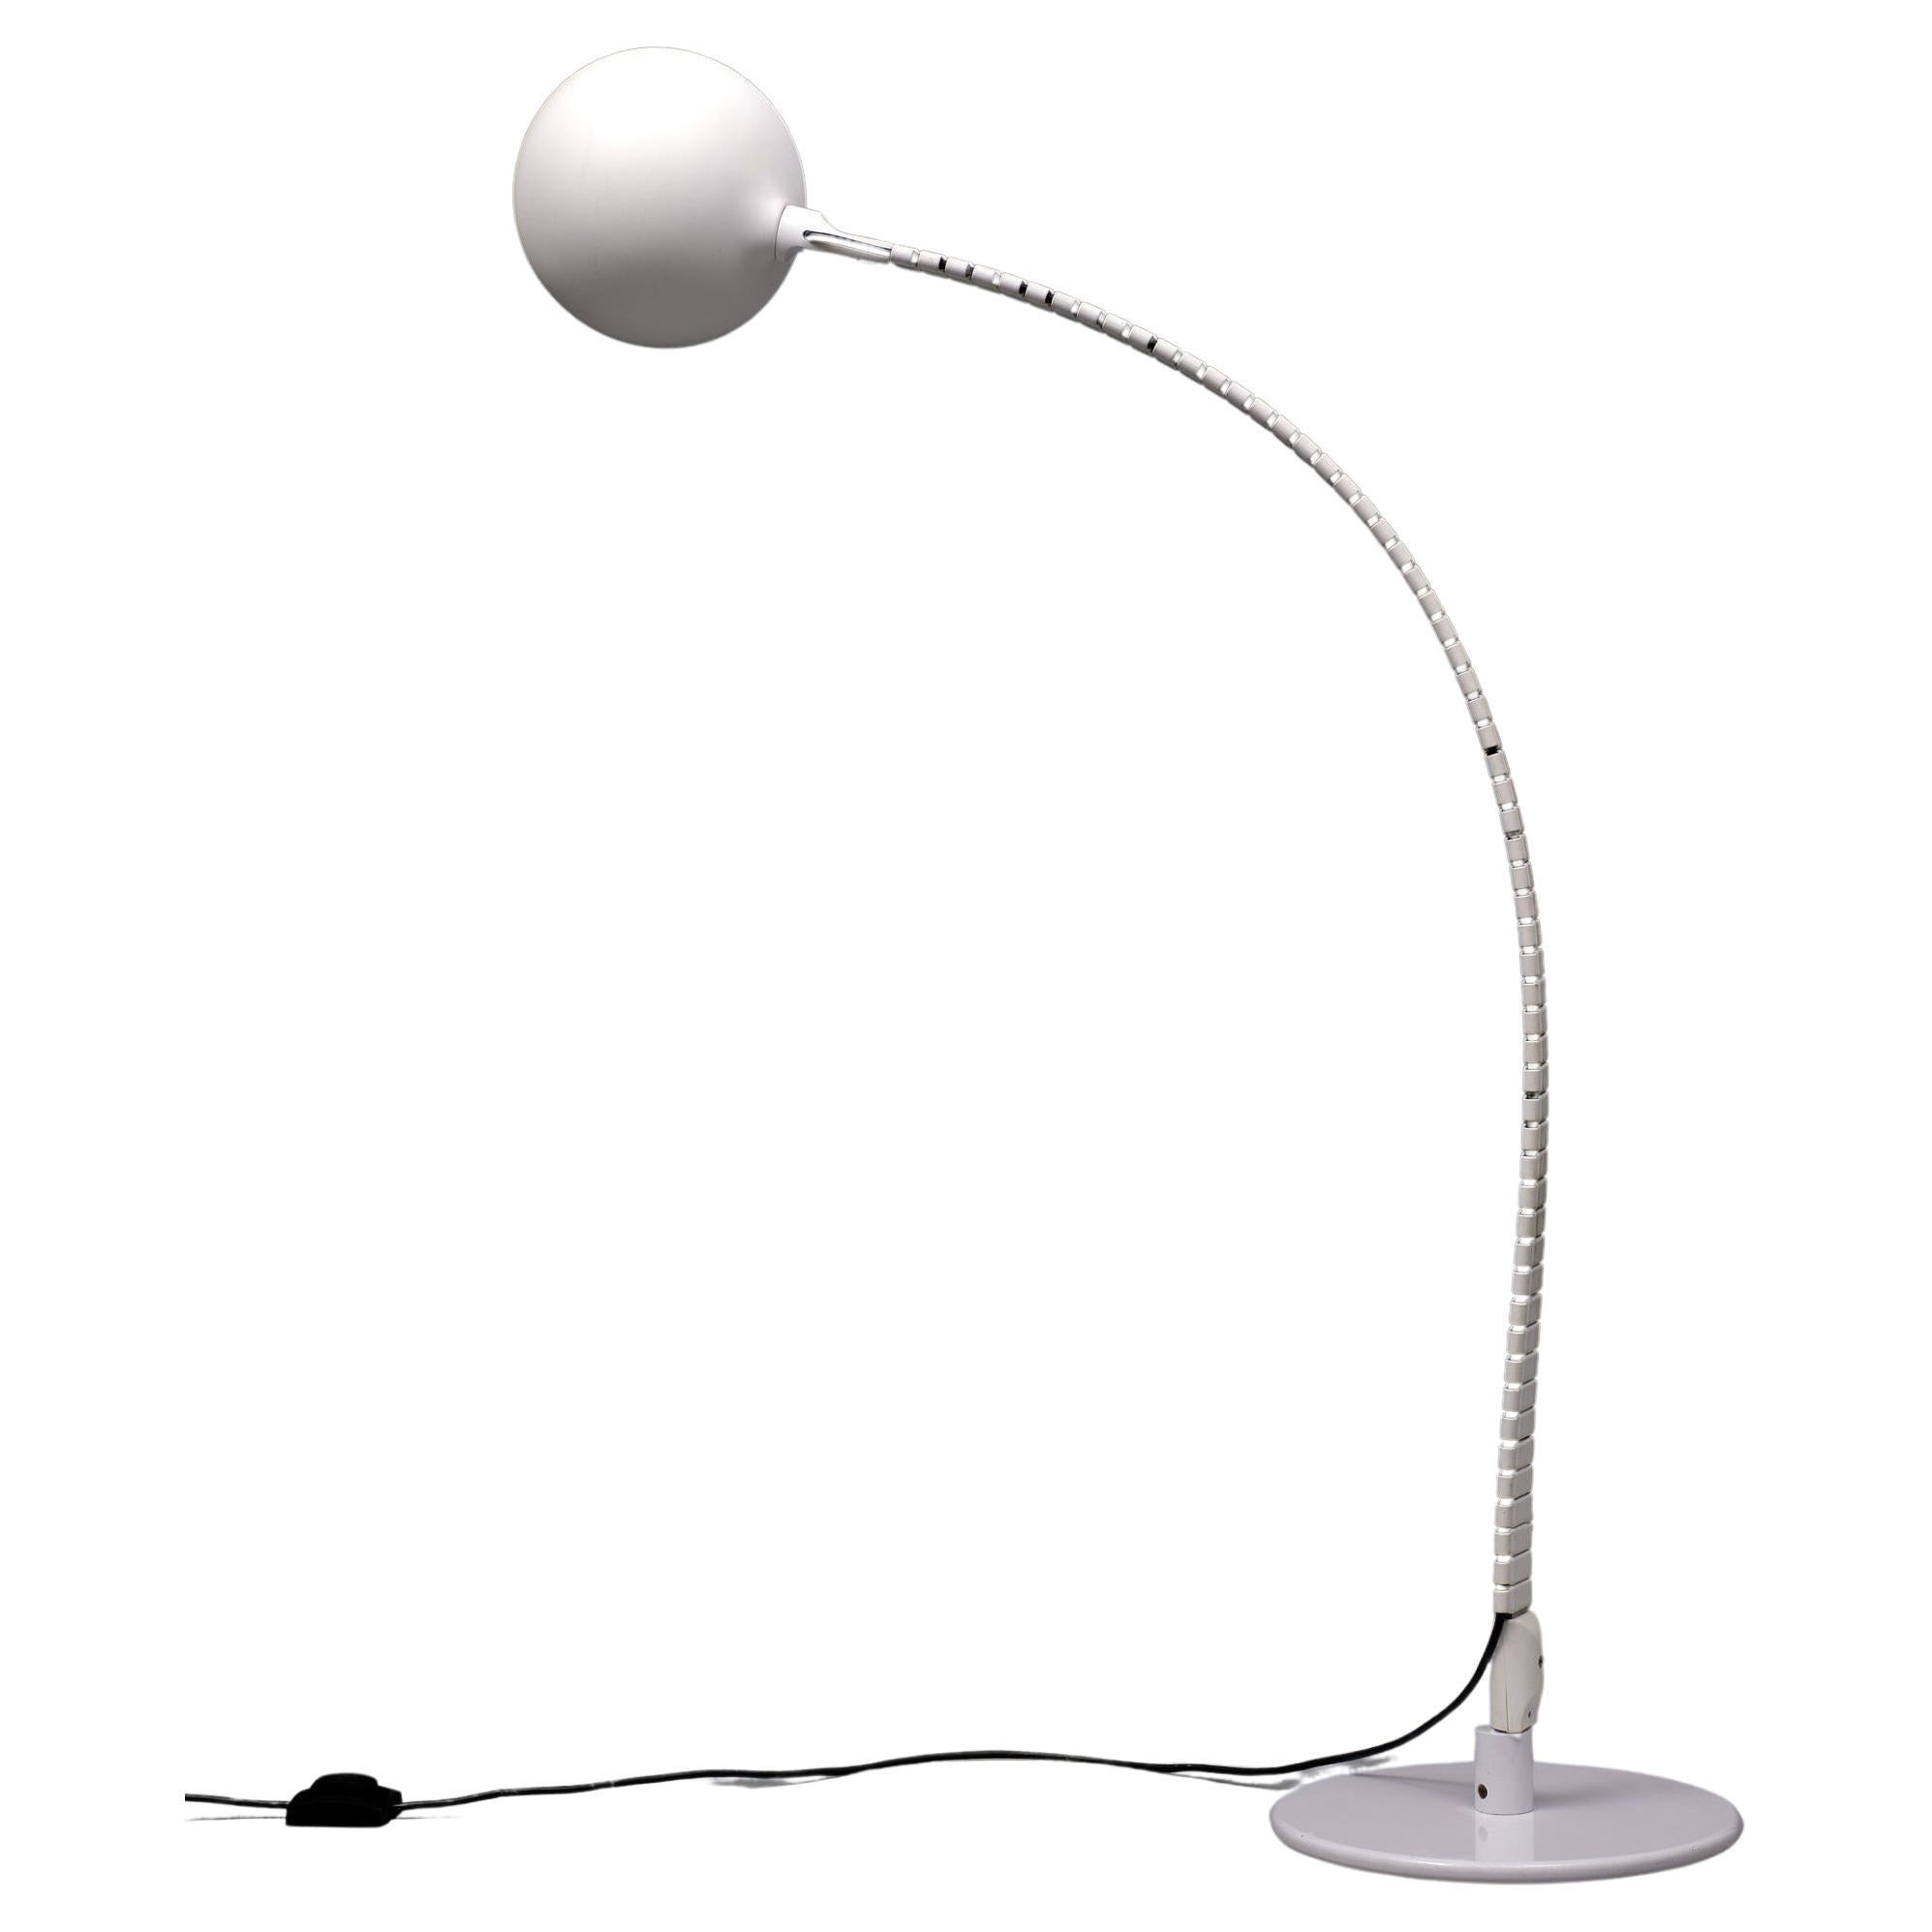 Floor lamp Flex model 2164 by Elio Martinelli for Martinelli Luce, 1960 Italy. The 'Flex' floor lamp (model flex Calotta) was designed by Elio Martinelli for Martinelli Luce, Italy in 1969. The adjustable arm is inspired by the human spine and made